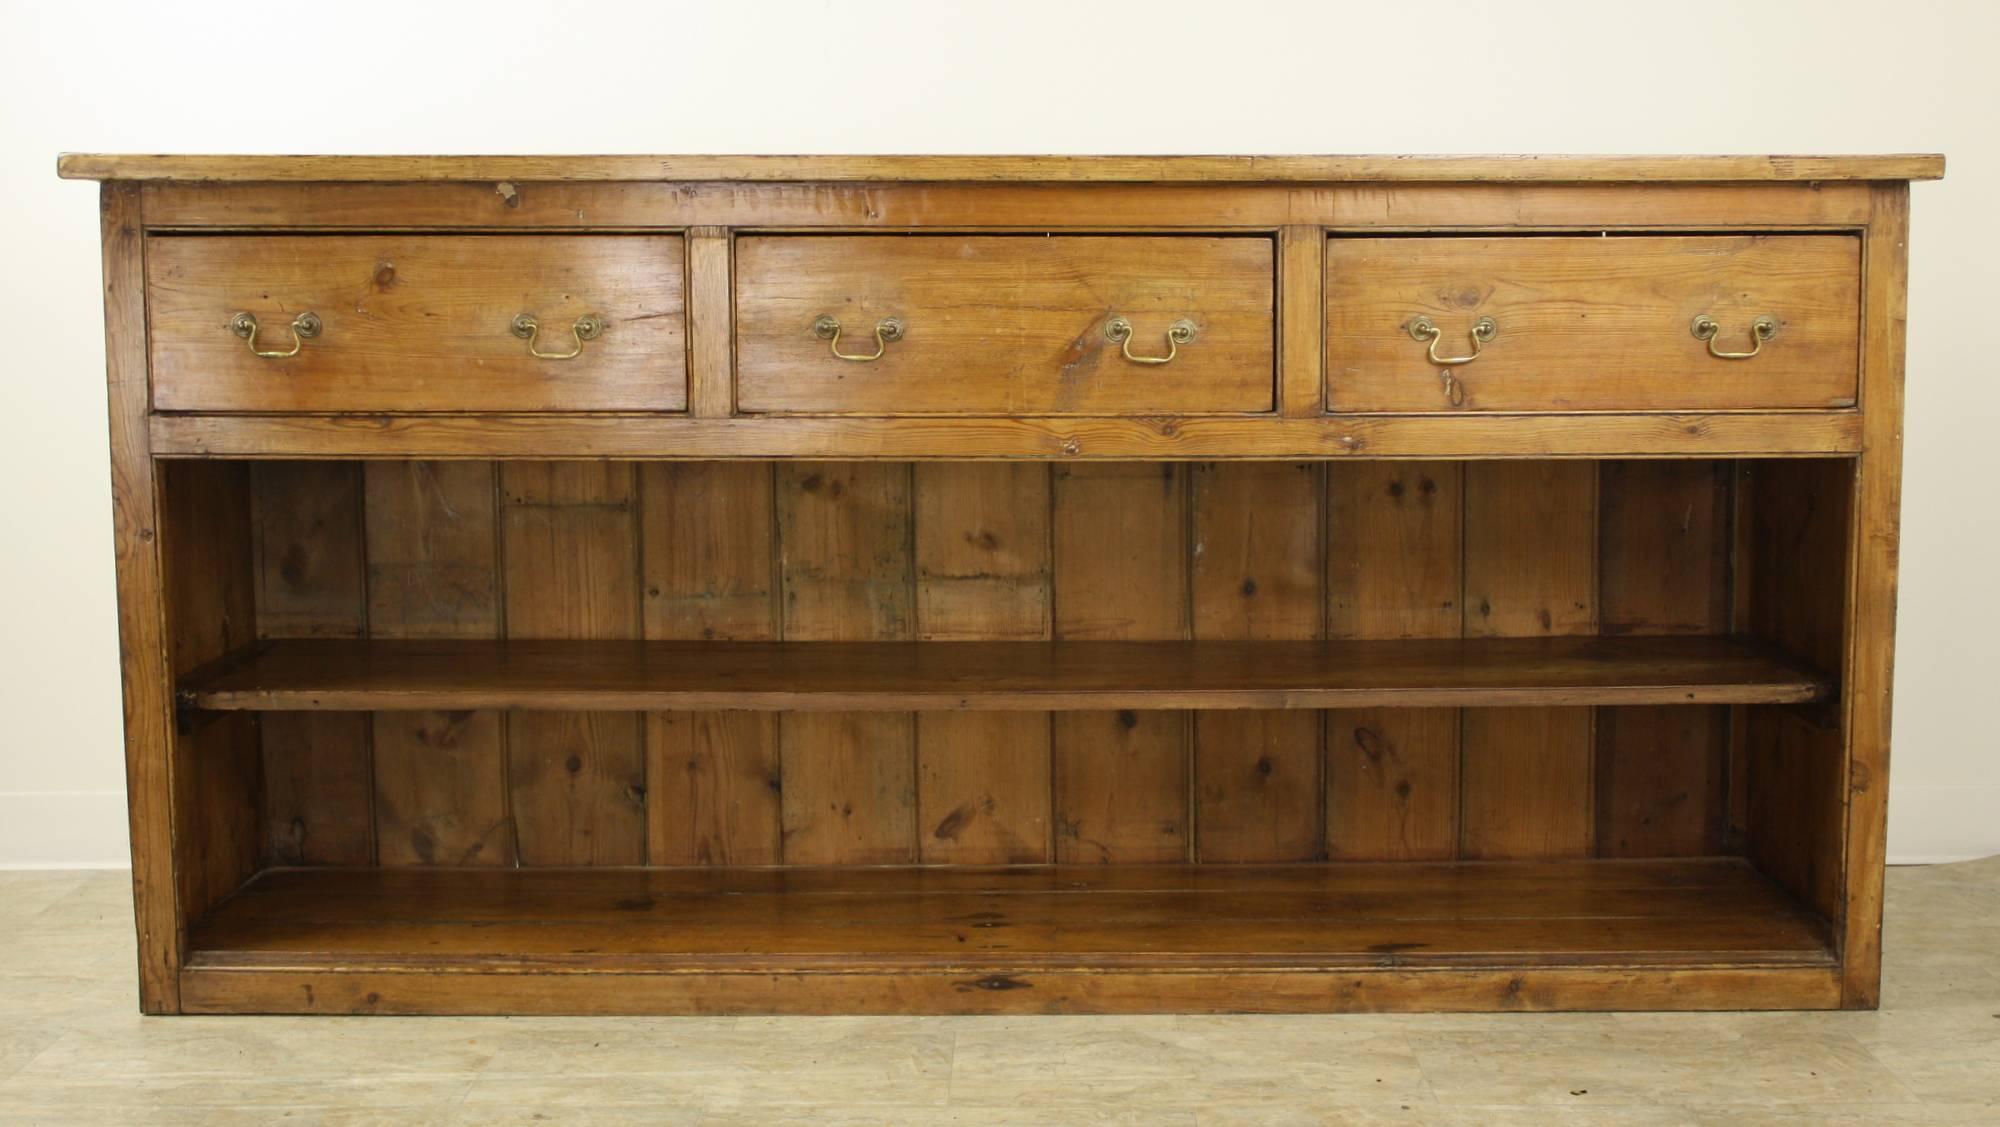 This lovely, glowing, Georgian pine sideboard offers good storage on the shelves below the three large drawers. The good long length of this console makes it a very practical unit. An attractive moulding on the ends of the top is a nice finishing